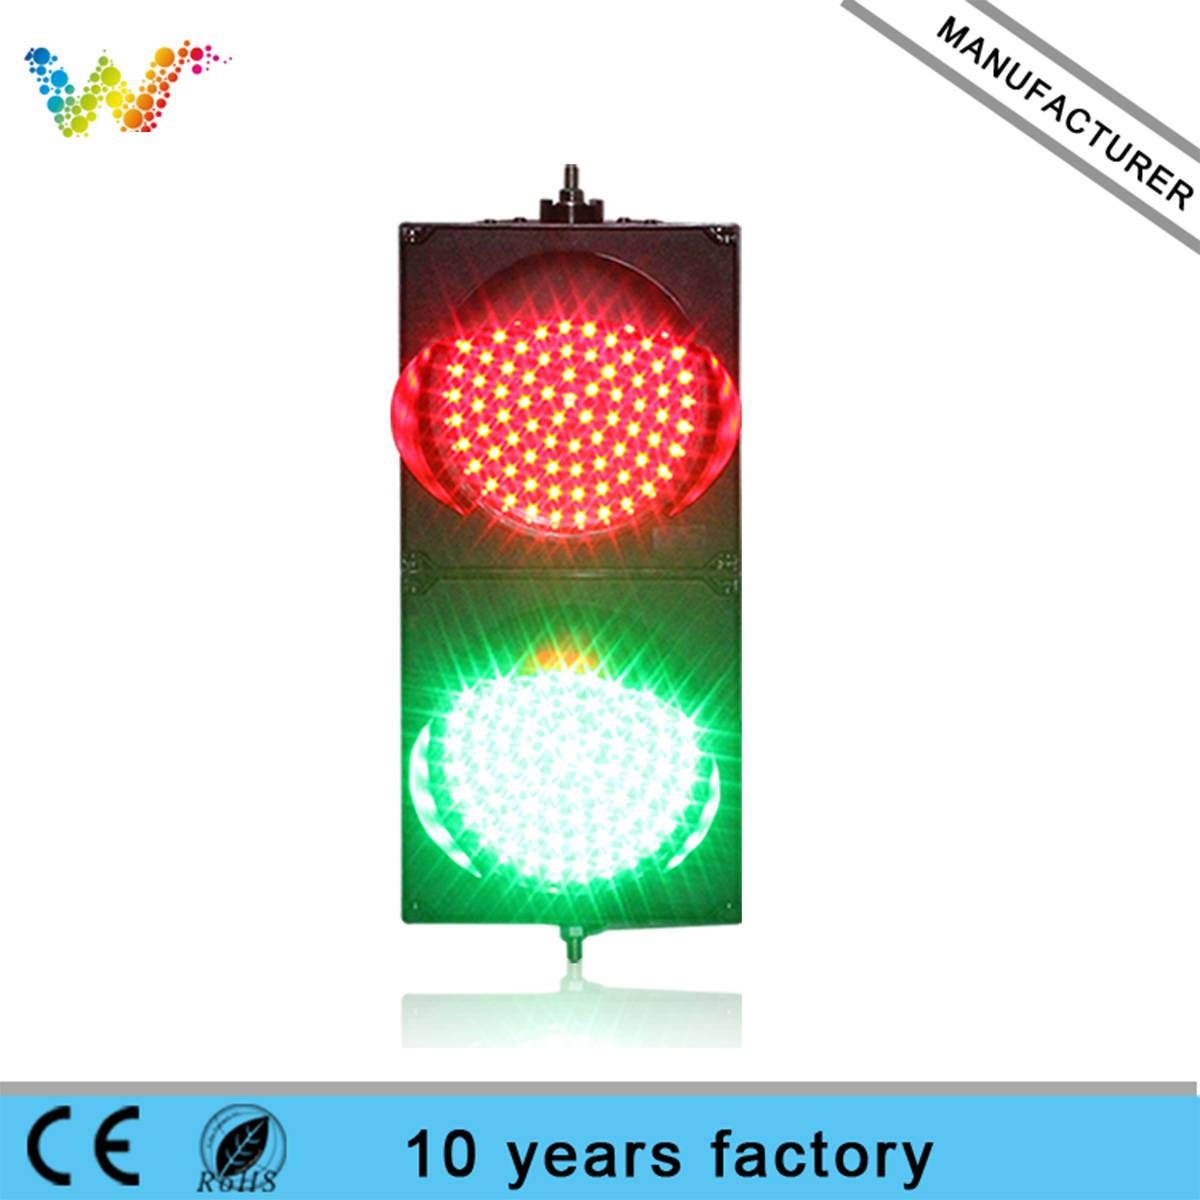 New design hot selling AC85-265V 200mm red yellow green PC LED traffic signal light for sale